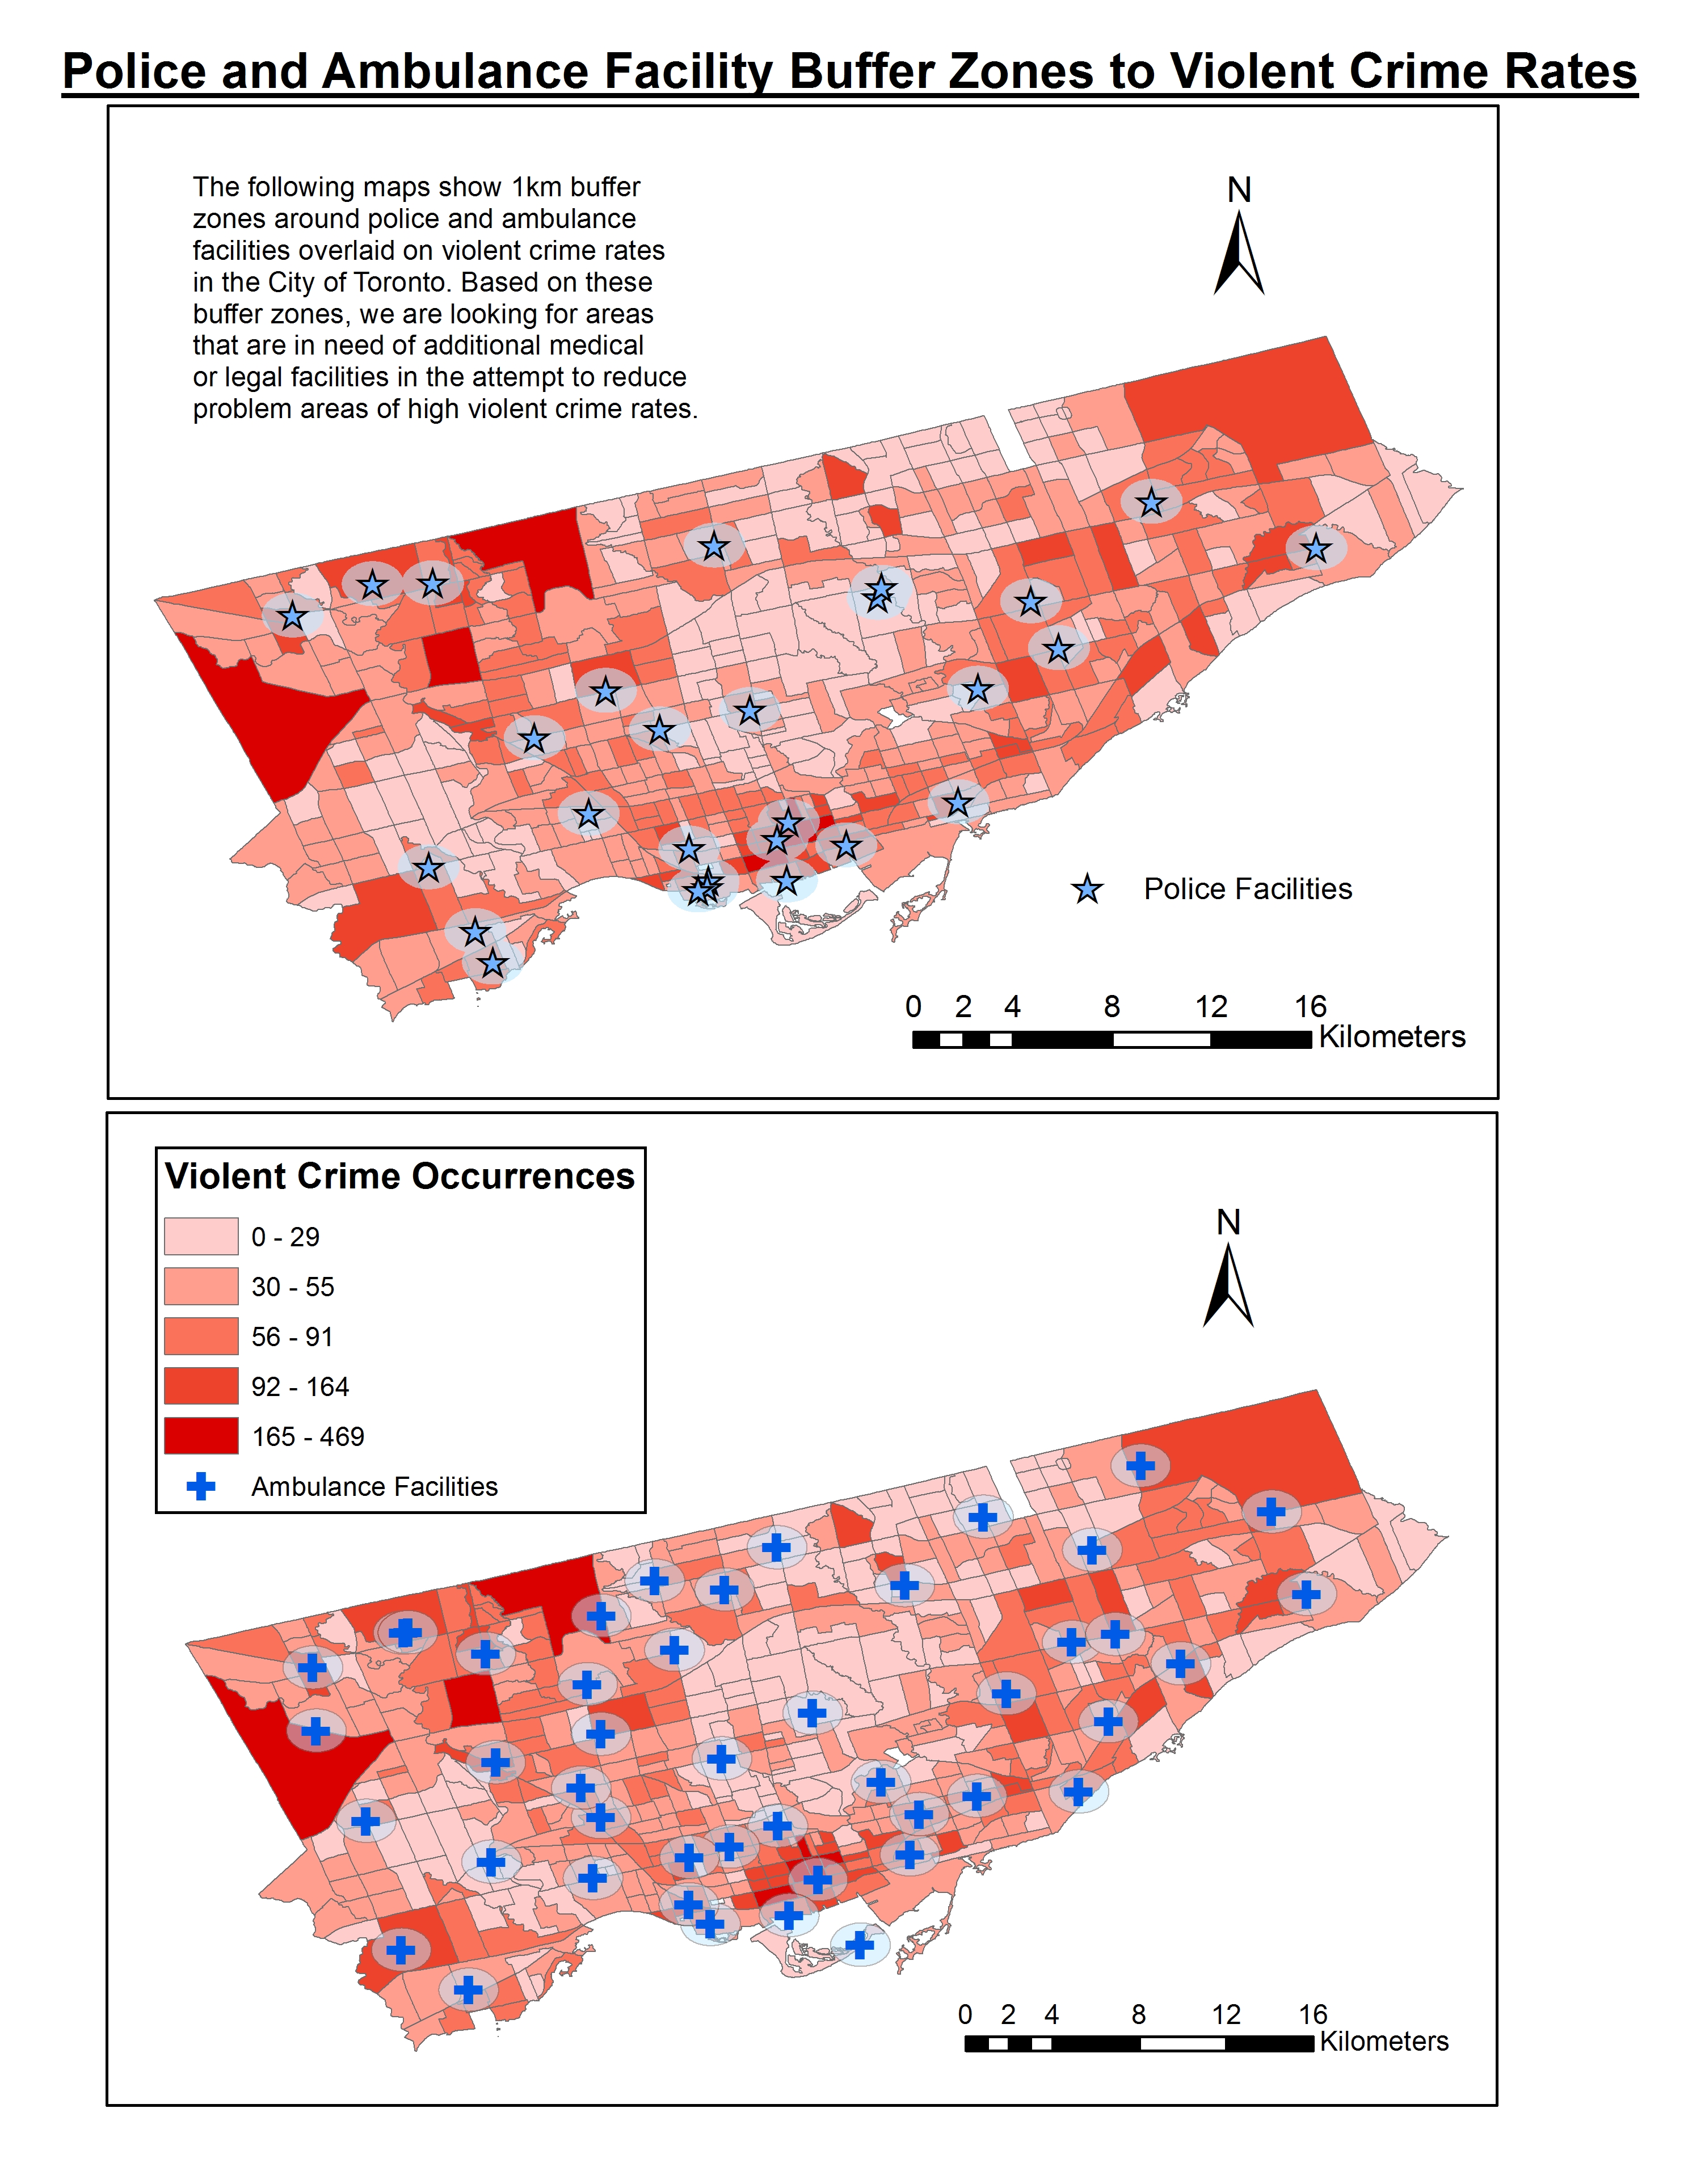 Base Data A Spatial Analysis of Violent Crime in the City of Toronto